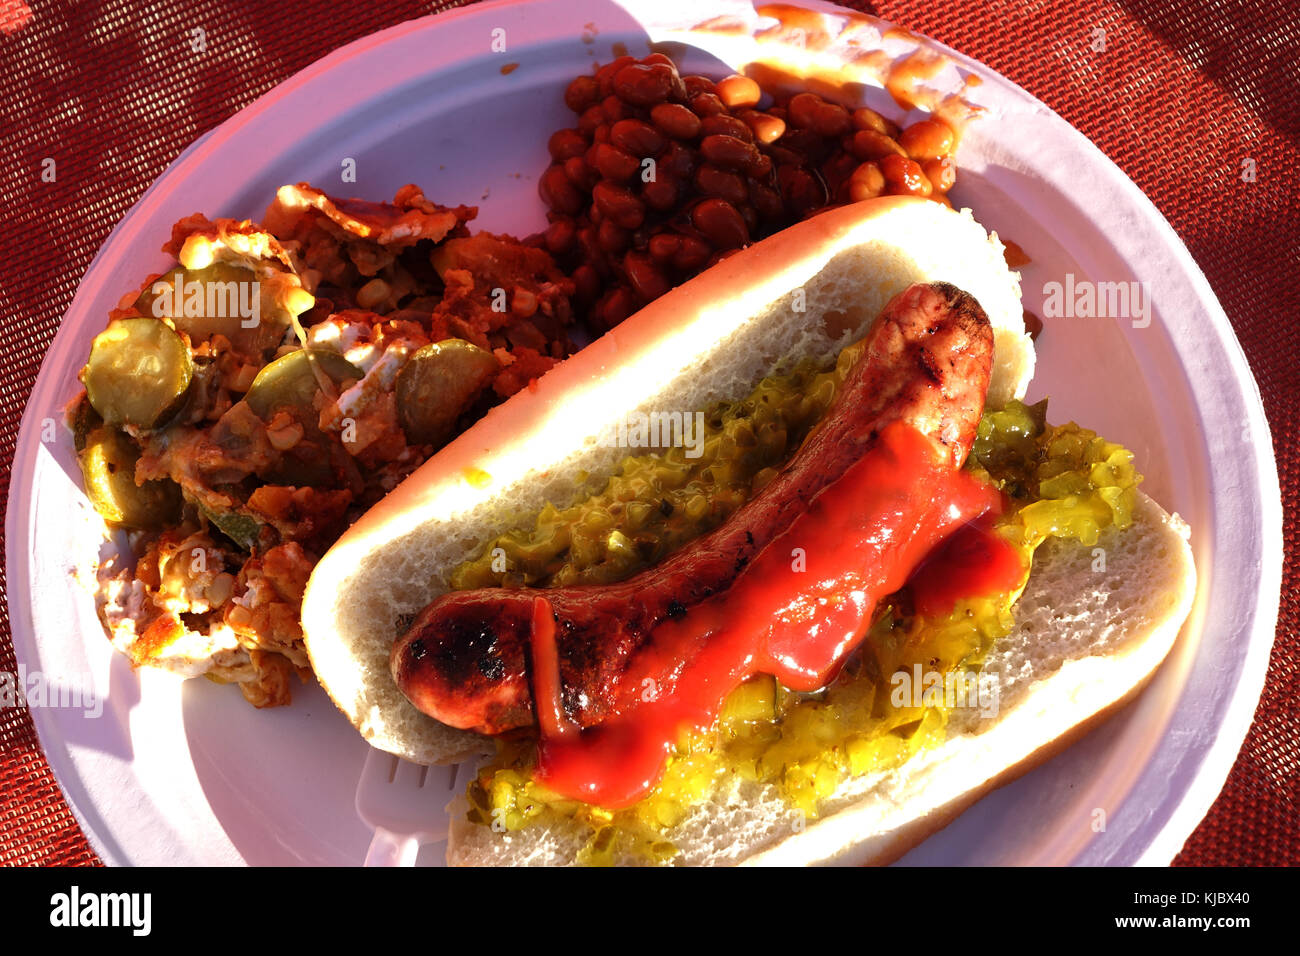 A bbq'd brat covered with ketchup, mustard and relish is plated on a paper plate along with baked beans and a Mexican pasta salad. Stock Photo